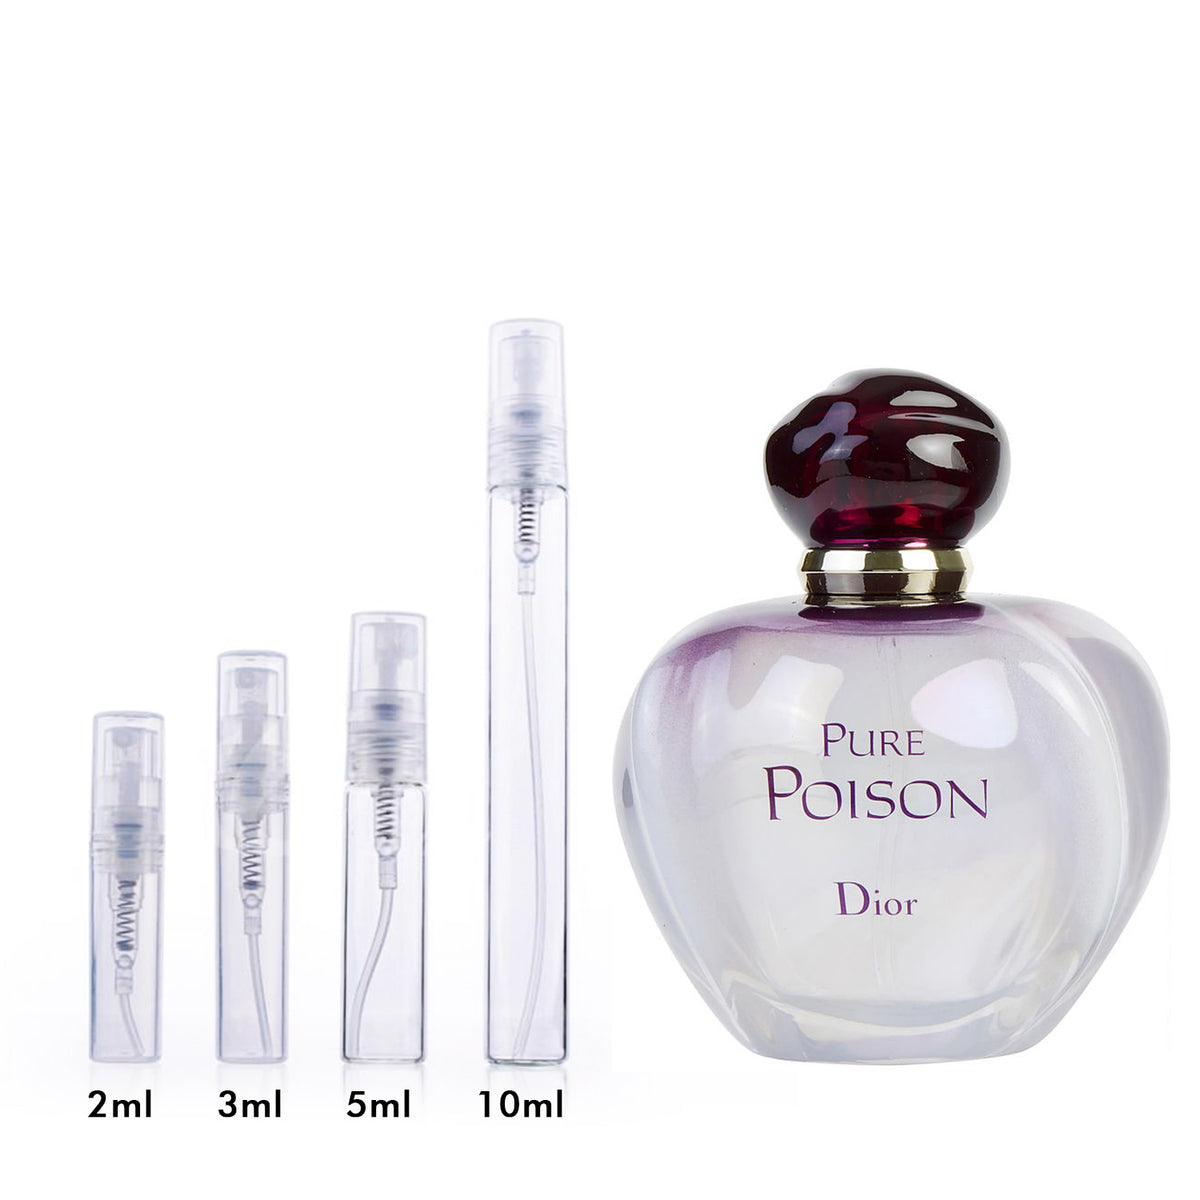 Pure Poison by Dior Fragrance Samples, DecantX